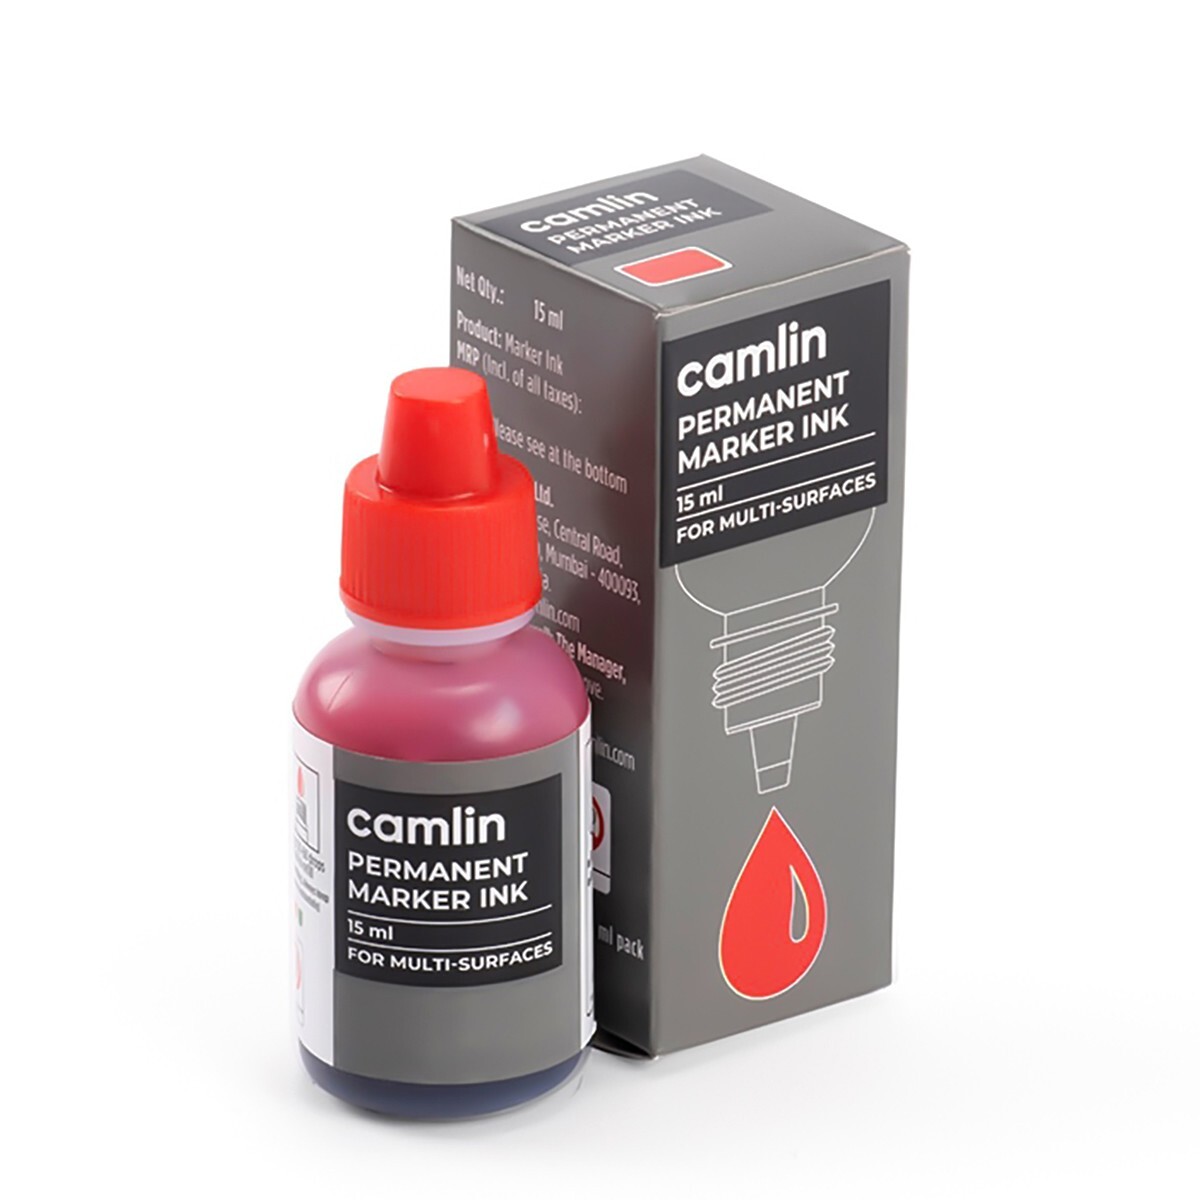 Camlin Permanent Marker Ink 15ml Red-7109369